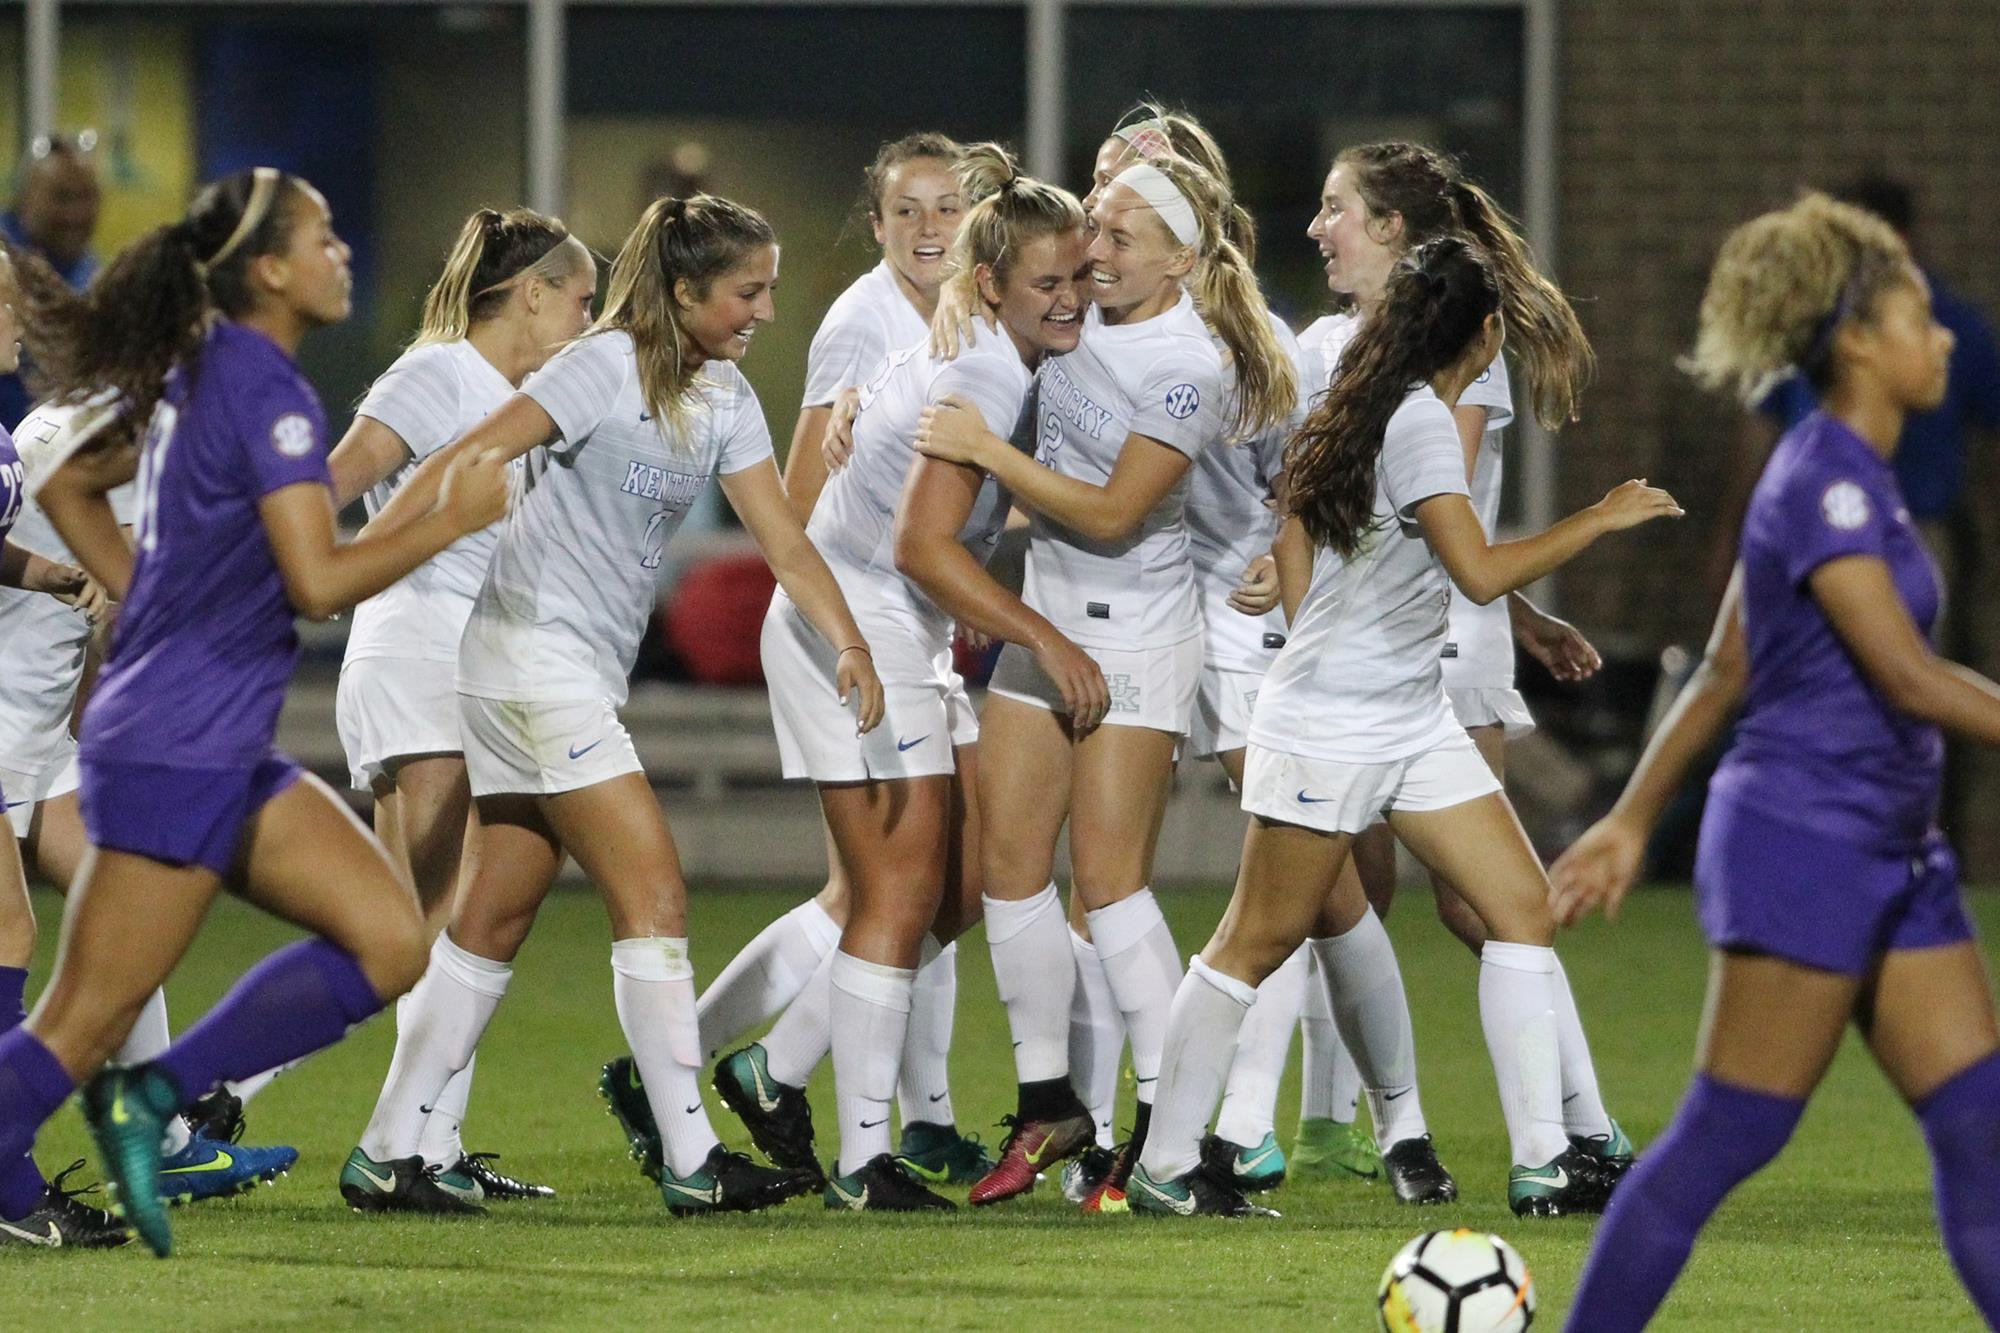 Babo’s Brace Leads UK Past LSU in Dominating Showing at The Bell